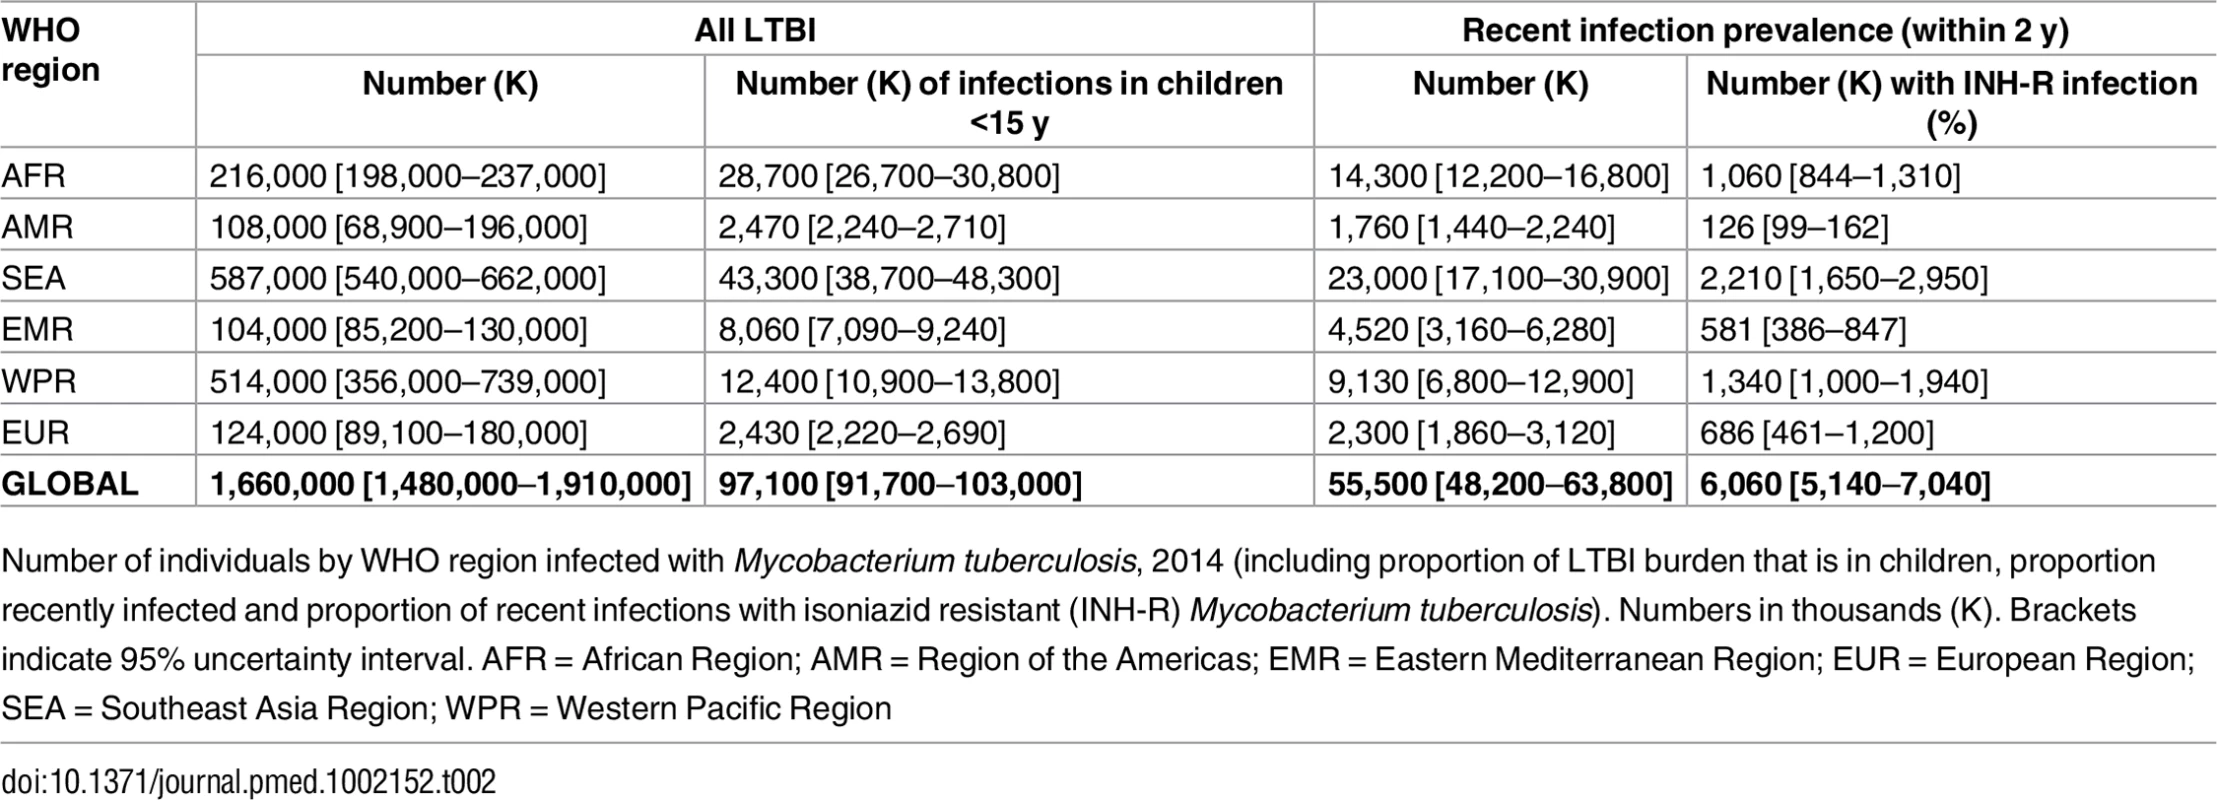 Number (thousands) of individuals with latent TB infection